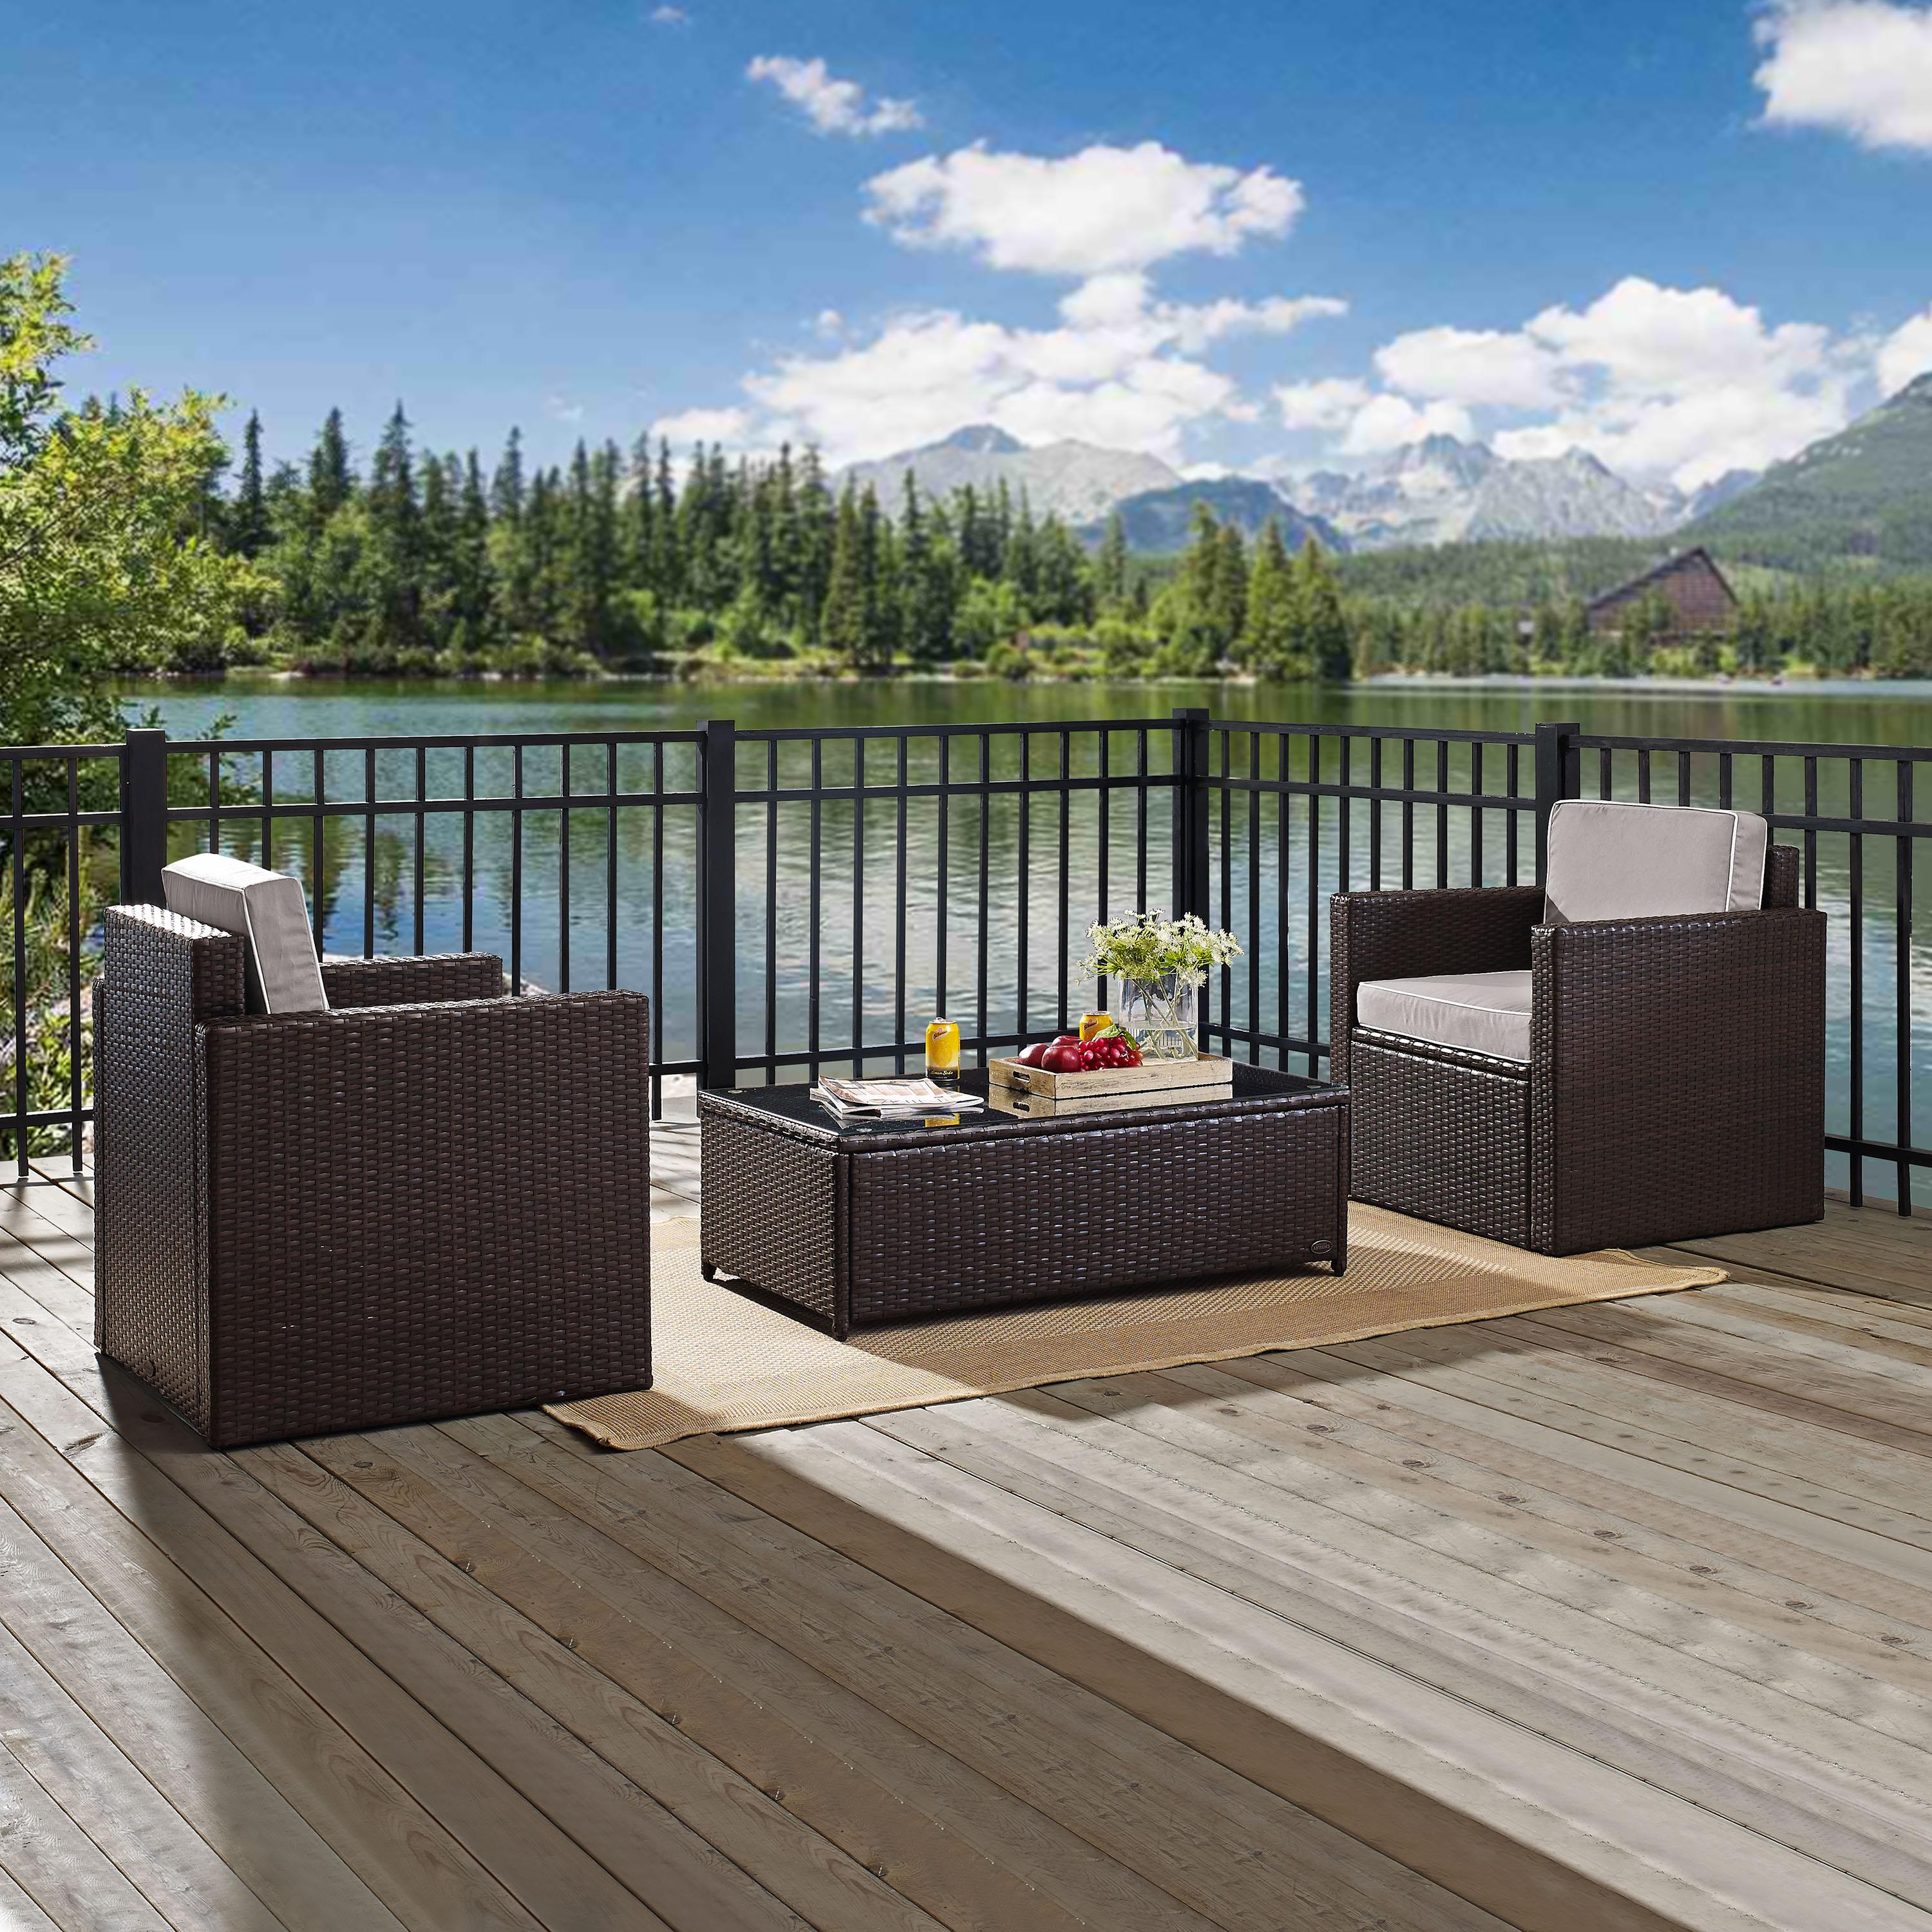 Crosley Palm Harbor 3 Piece Wicker Patio Conversation Set in Brown and Gray - image 5 of 7